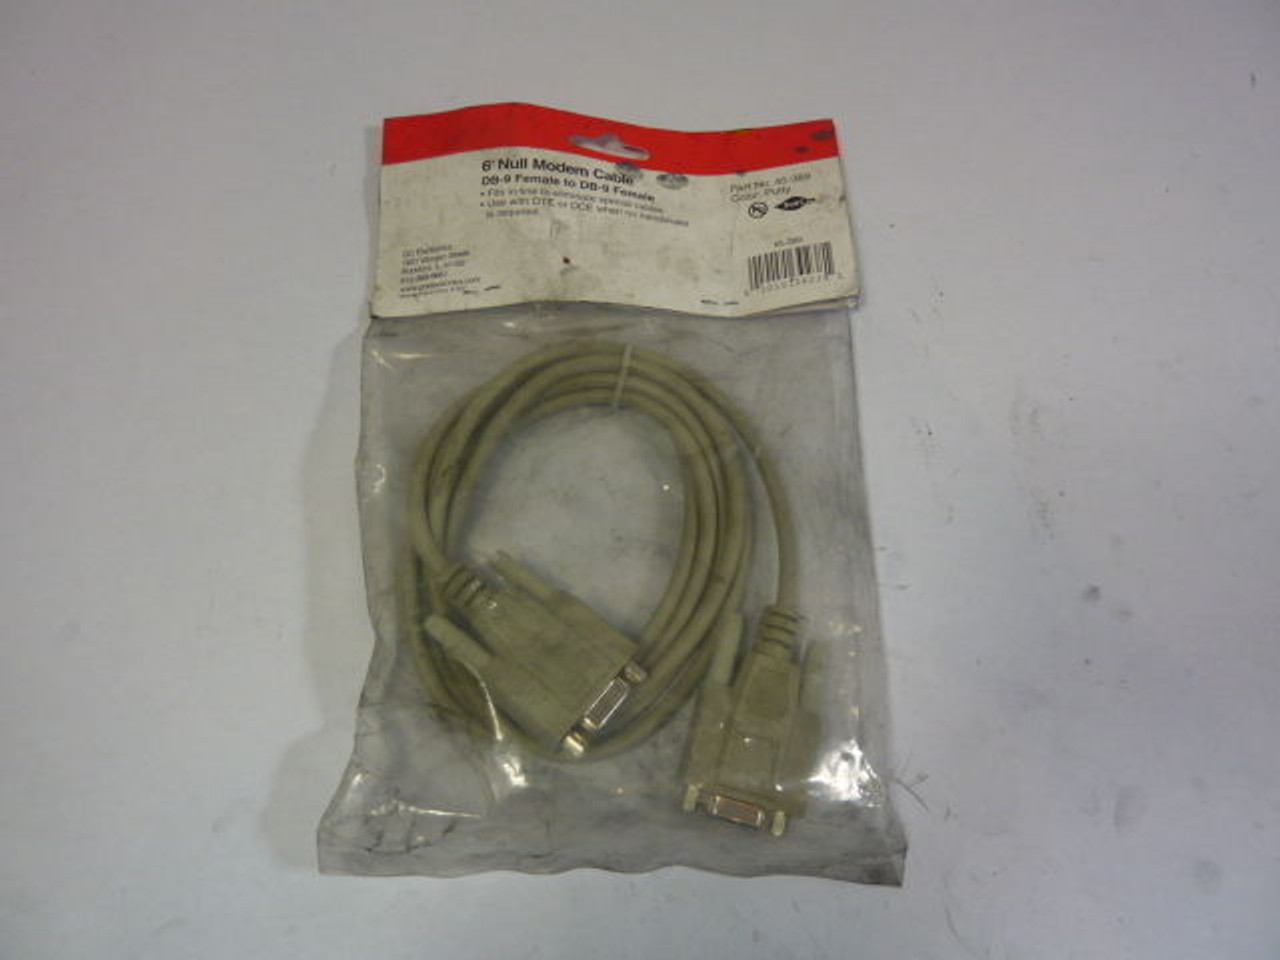 GC 45-389 Female Modem Cable DB-9 ! NEW !